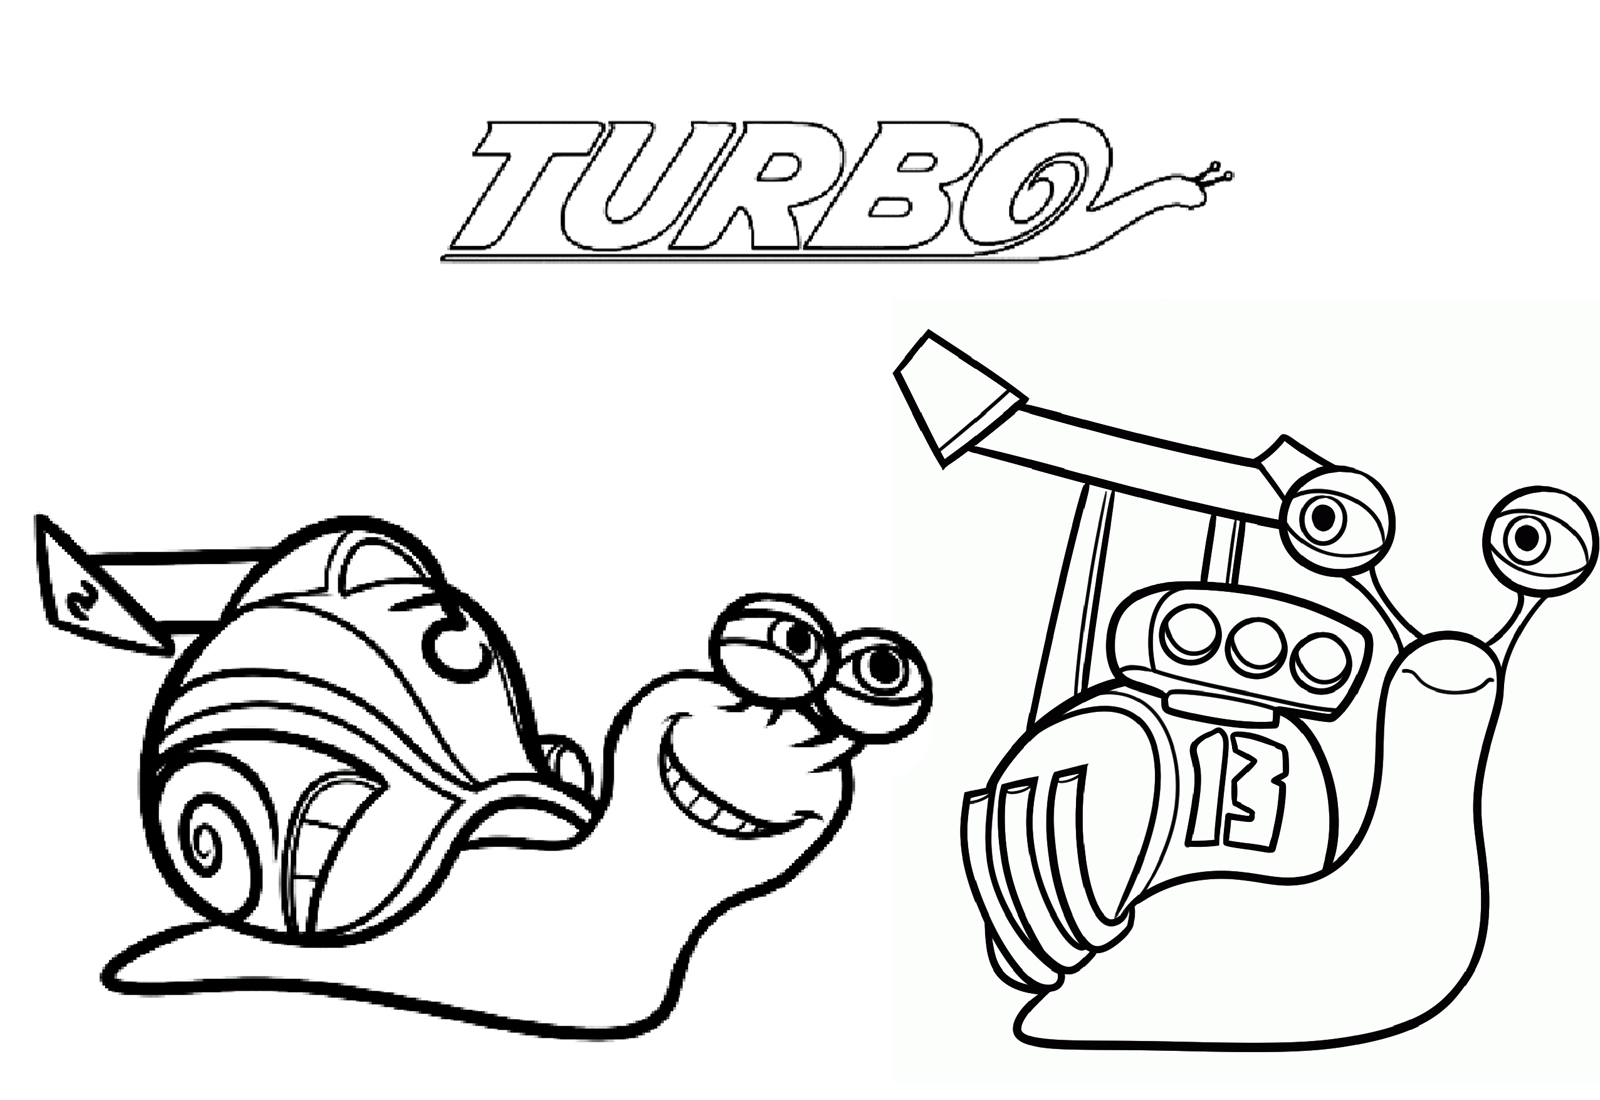 Turbo free to color for kids - Turbo Kids Coloring Pages